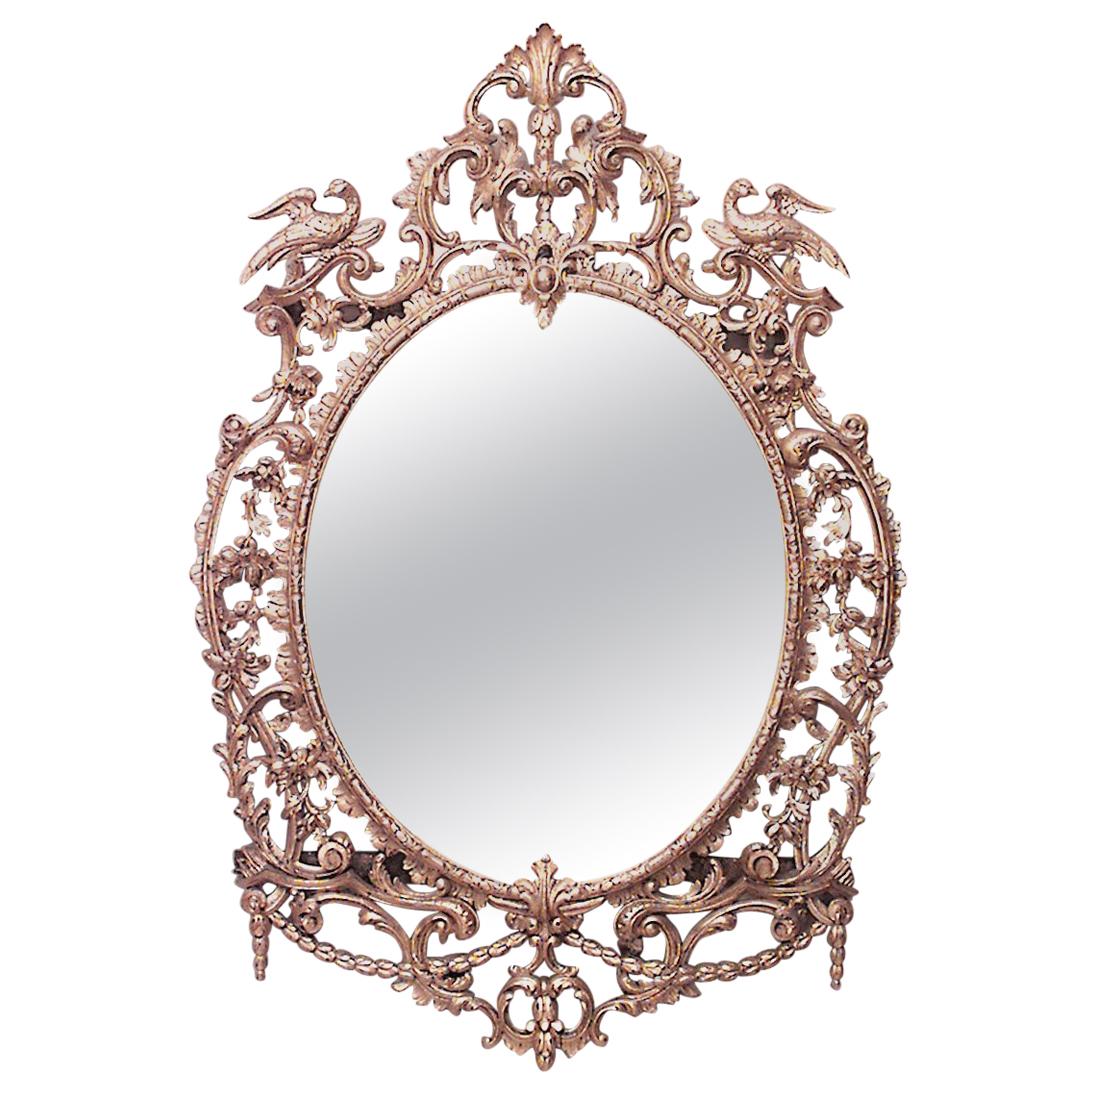 English Georgian Oval Carved Giltwood Filigree Wall Mirror For Sale